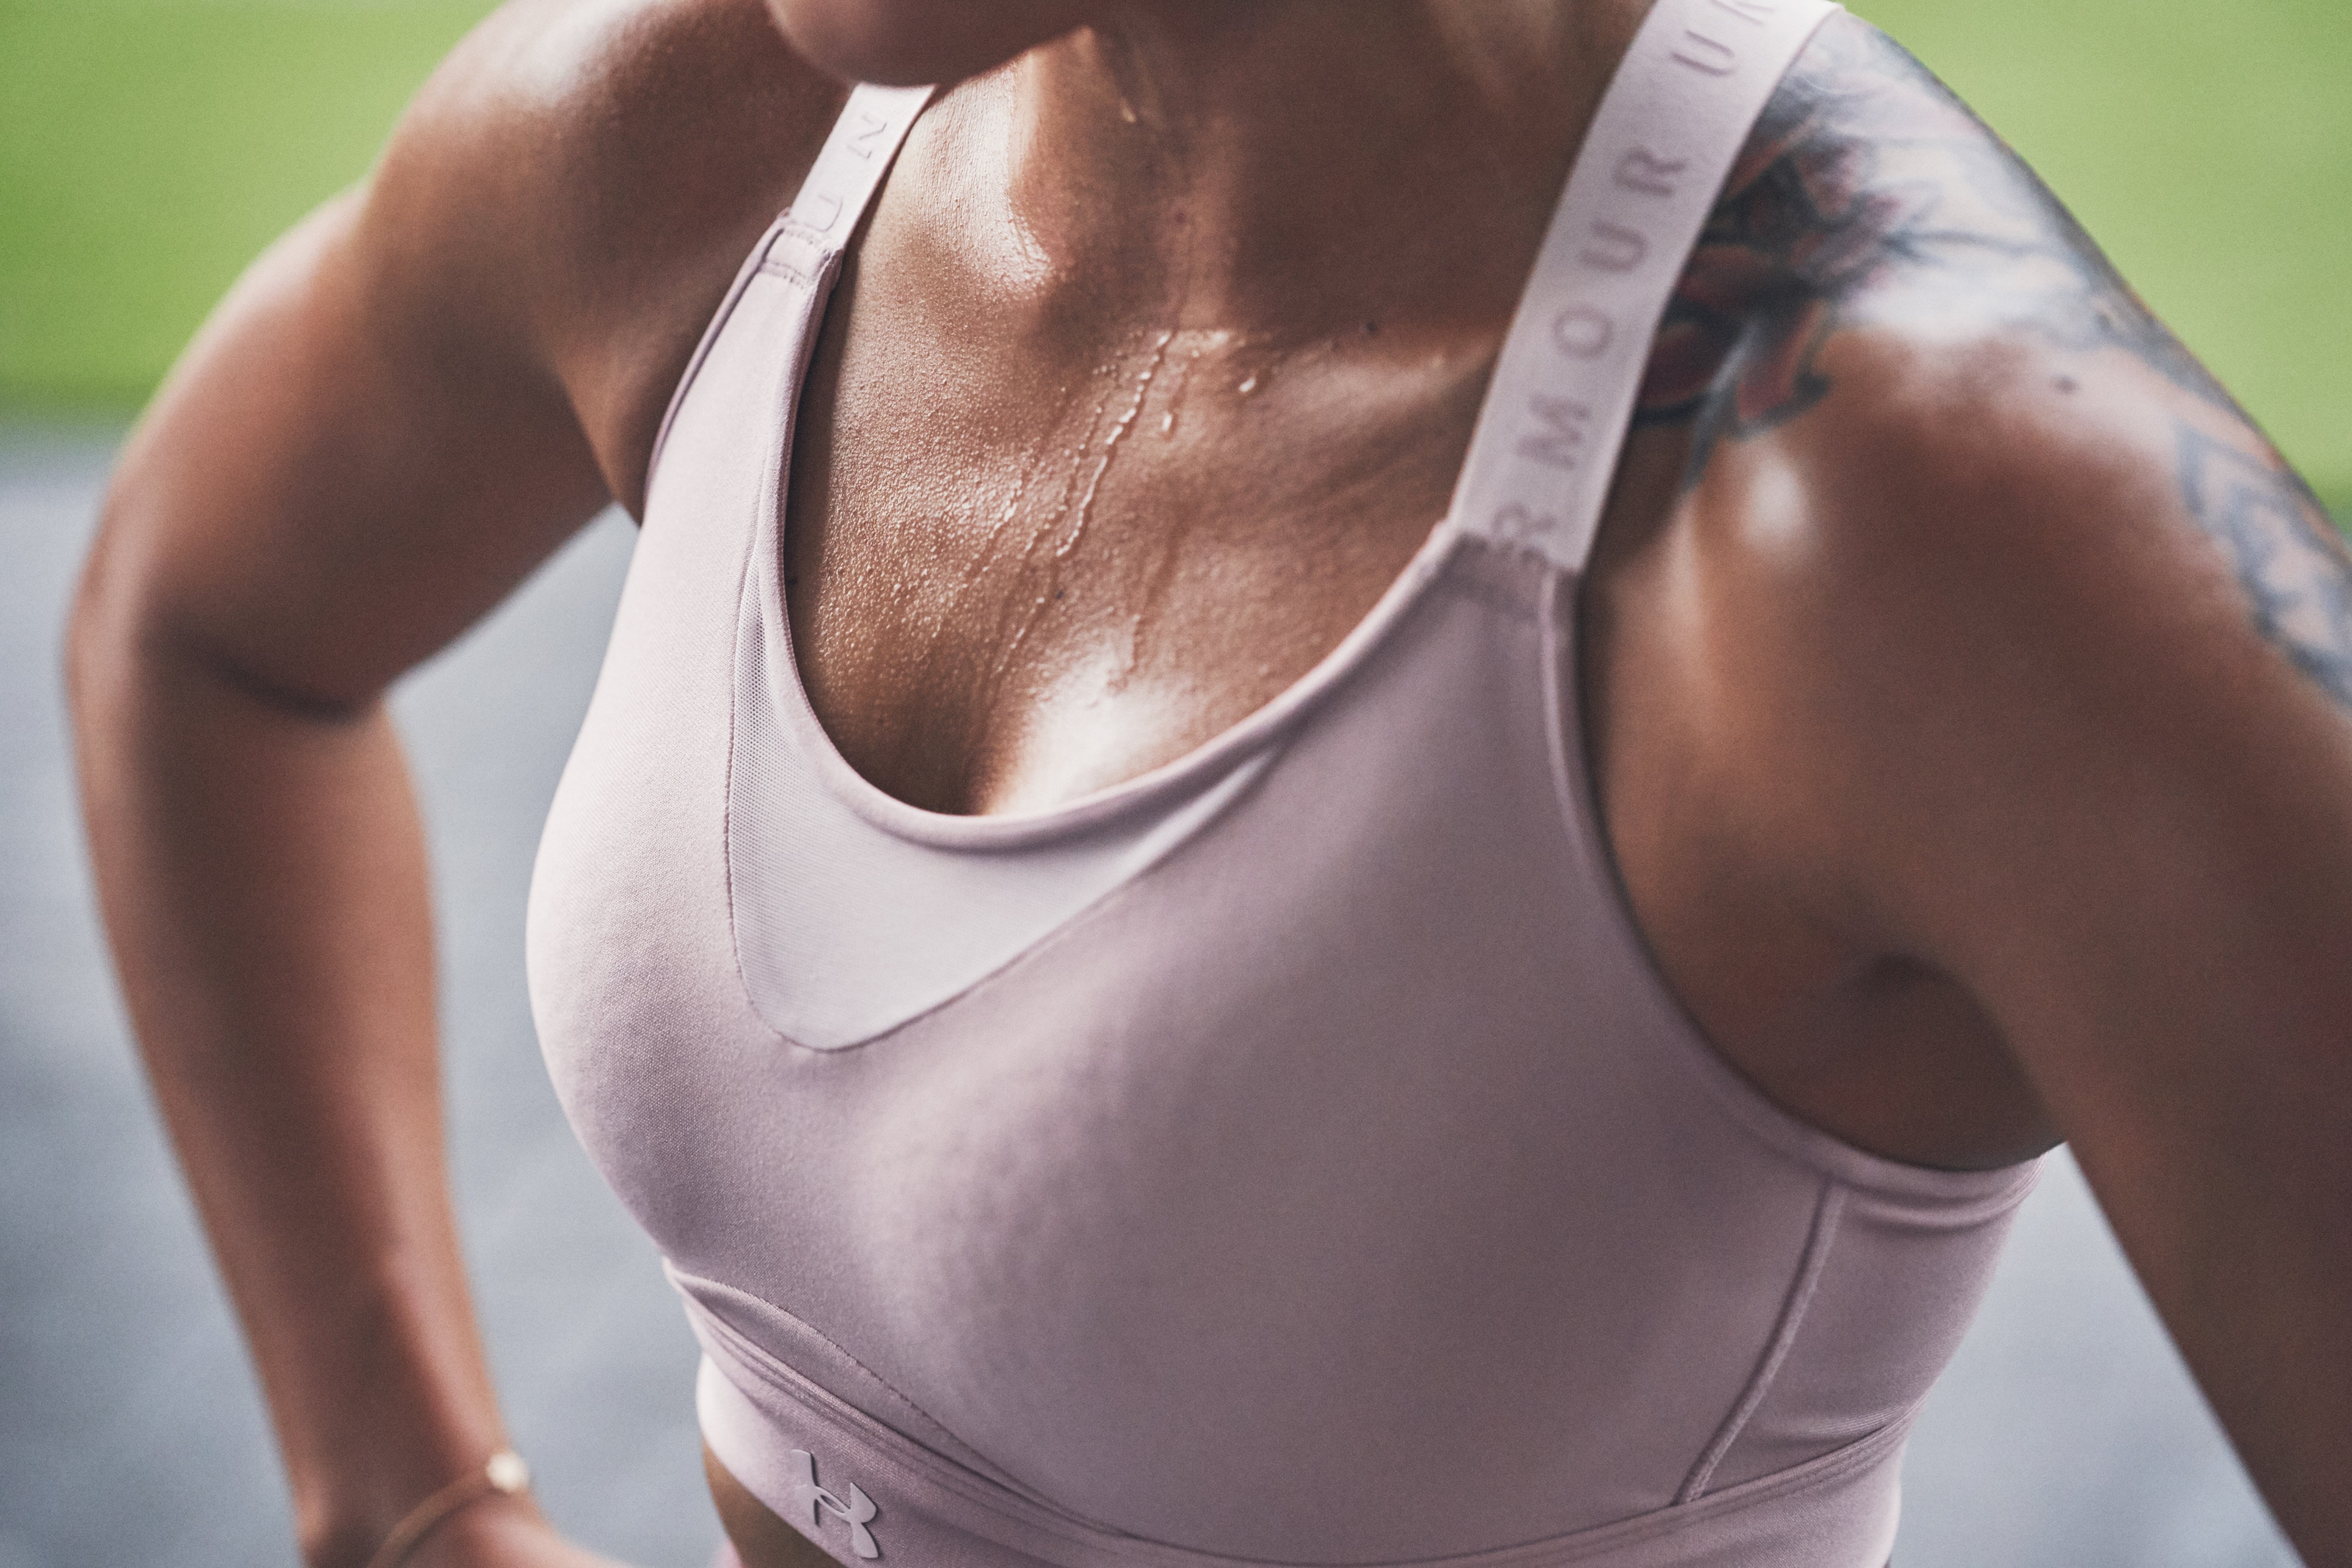 Shop These Under Armour Sports Bras Before Hiking